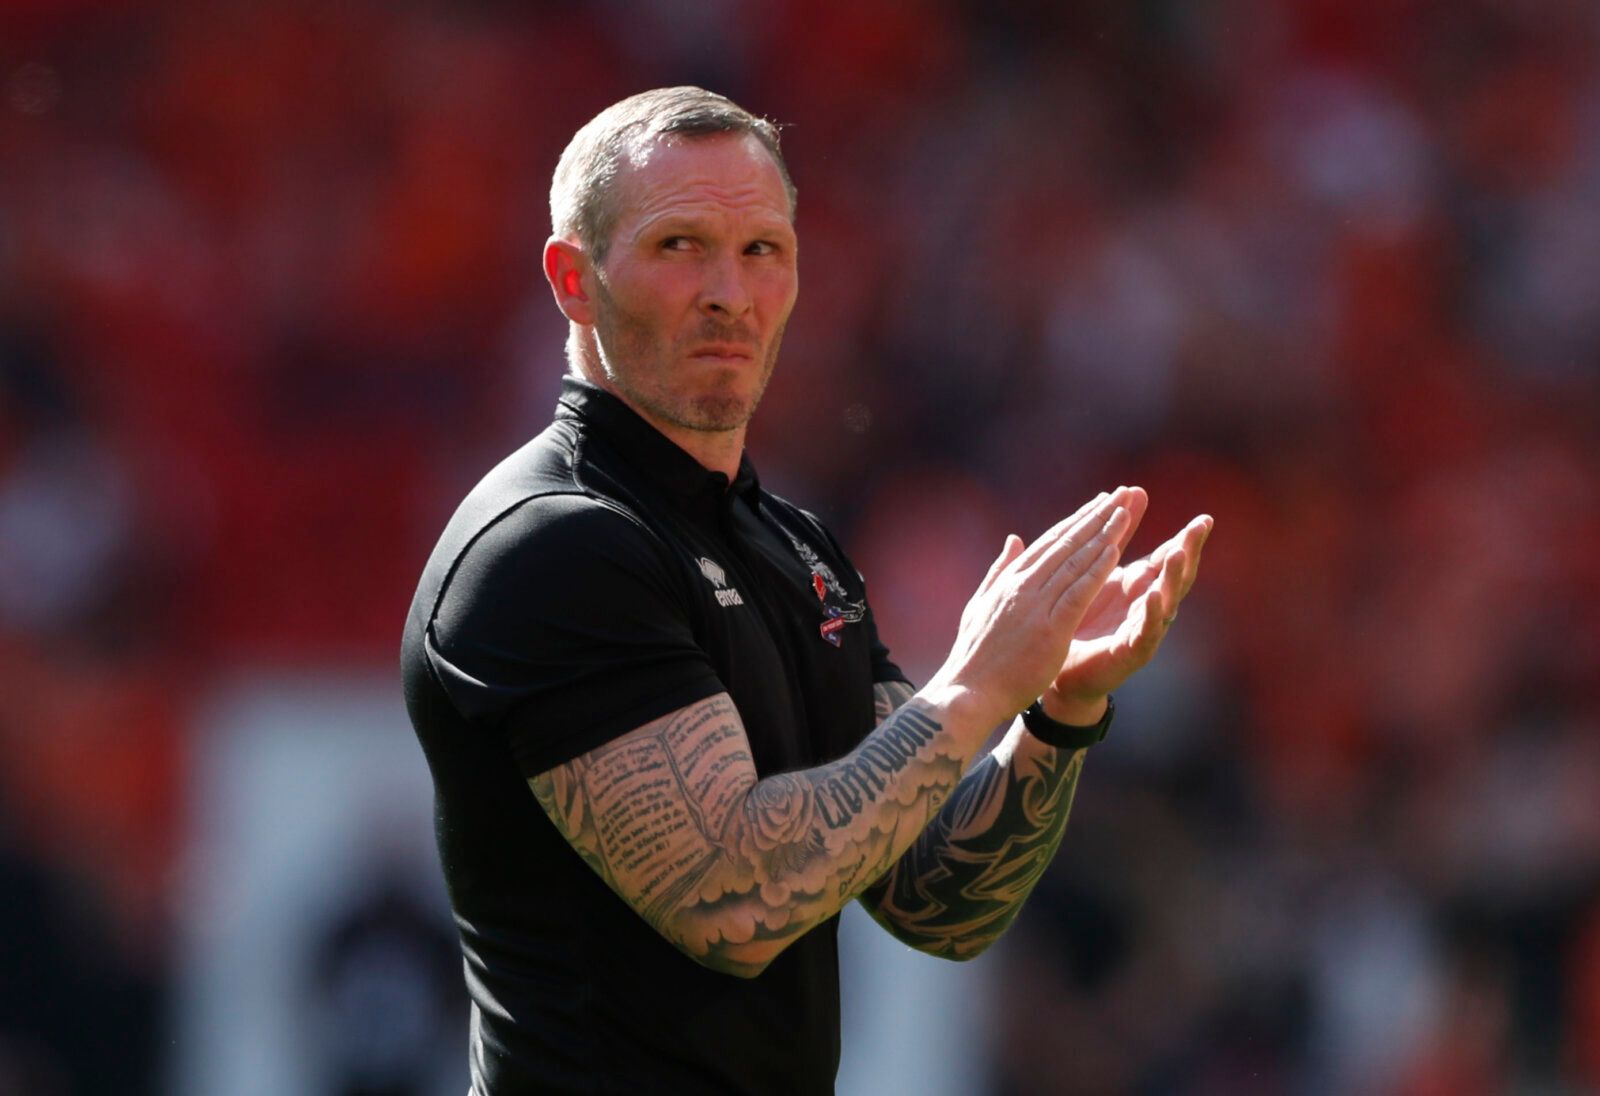 Soccer Football - League One Play-Off Final - Blackpool v Lincoln City - Wembley Stadium, London, Britain - May 30, 2021 Lincoln City manager Michael Appleton looks dejected as he applauds fans after the match Action Images/Lee Smith EDITORIAL USE ONLY. No use with unauthorized audio, video, data, fixture lists, club/league logos or 'live' services. Online in-match use limited to 75 images, no video emulation. No use in betting, games or single club/league/player publications.  Please contact yo